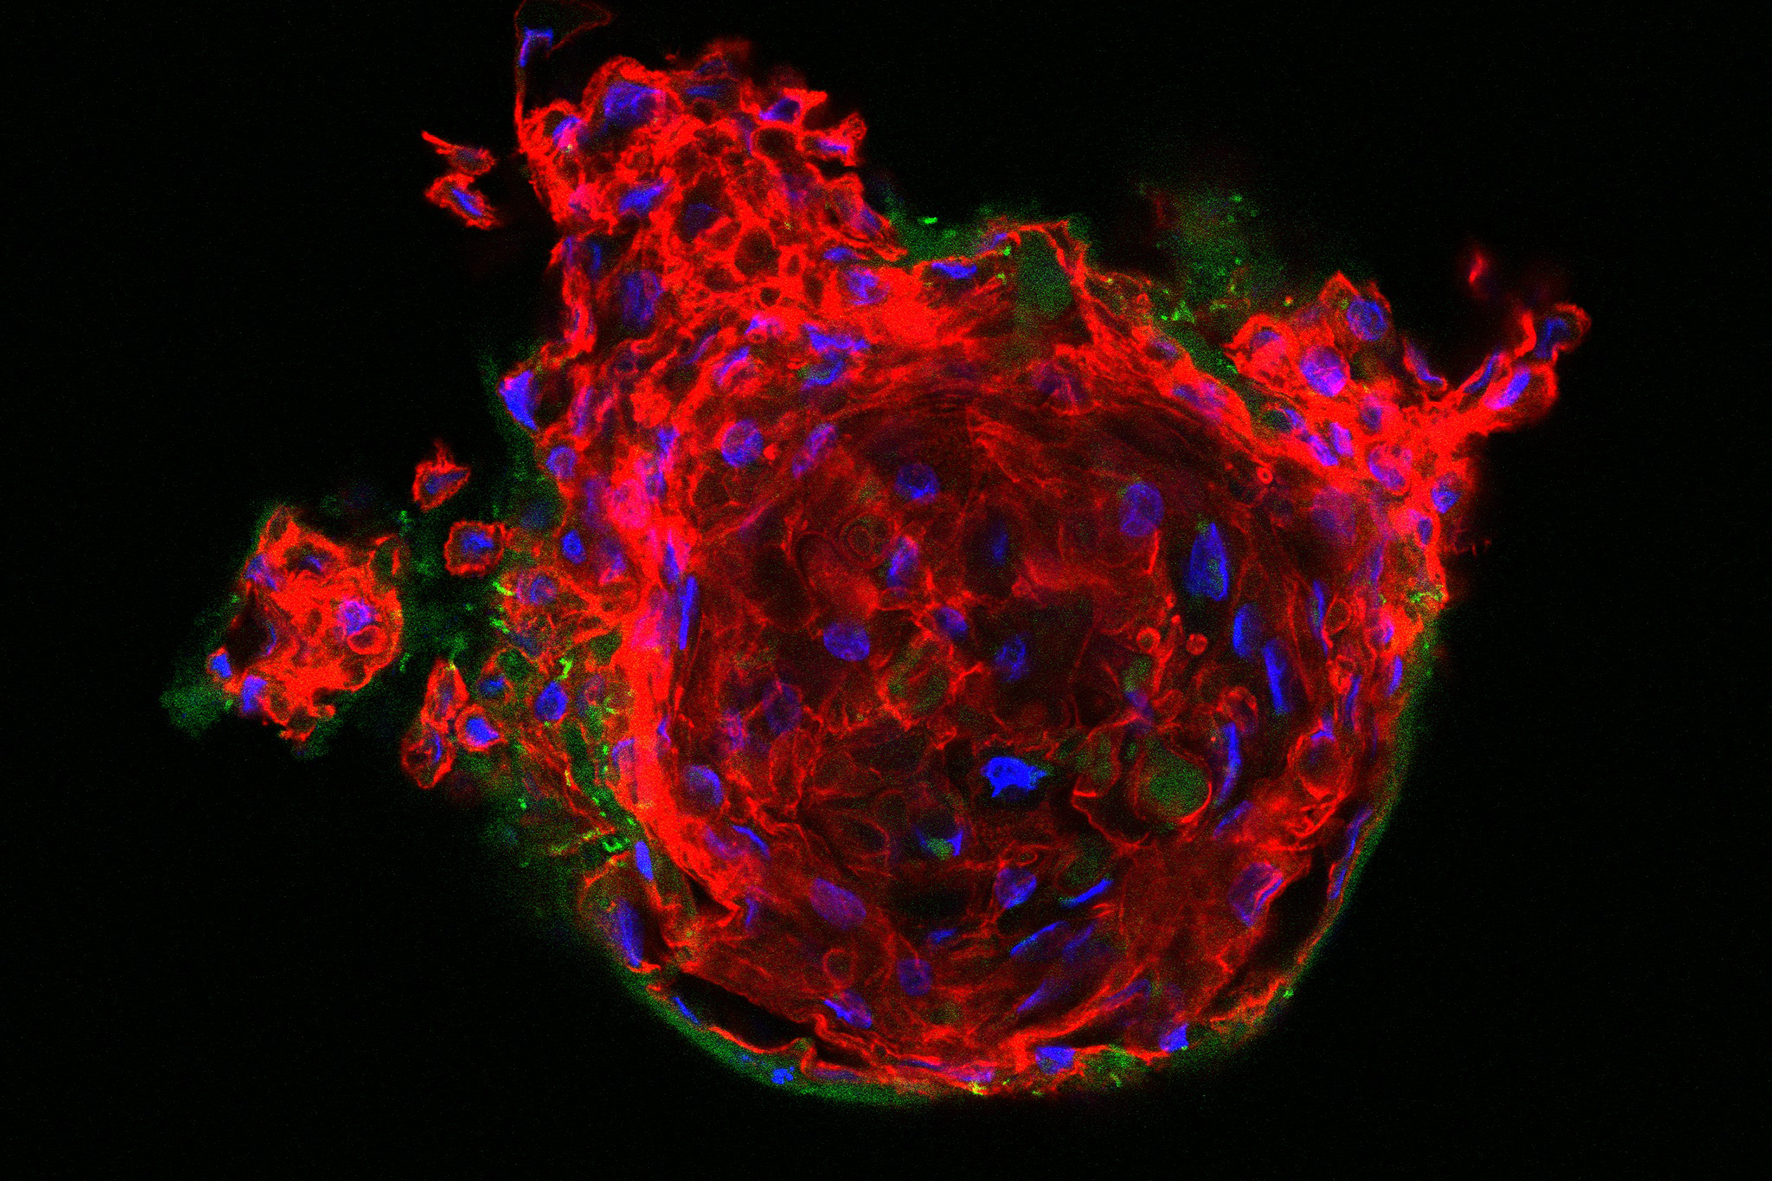 3D cell cultures such as this fixed human epithelial organoid should in future be investigable with live imaging in order to visualize cellular processes.